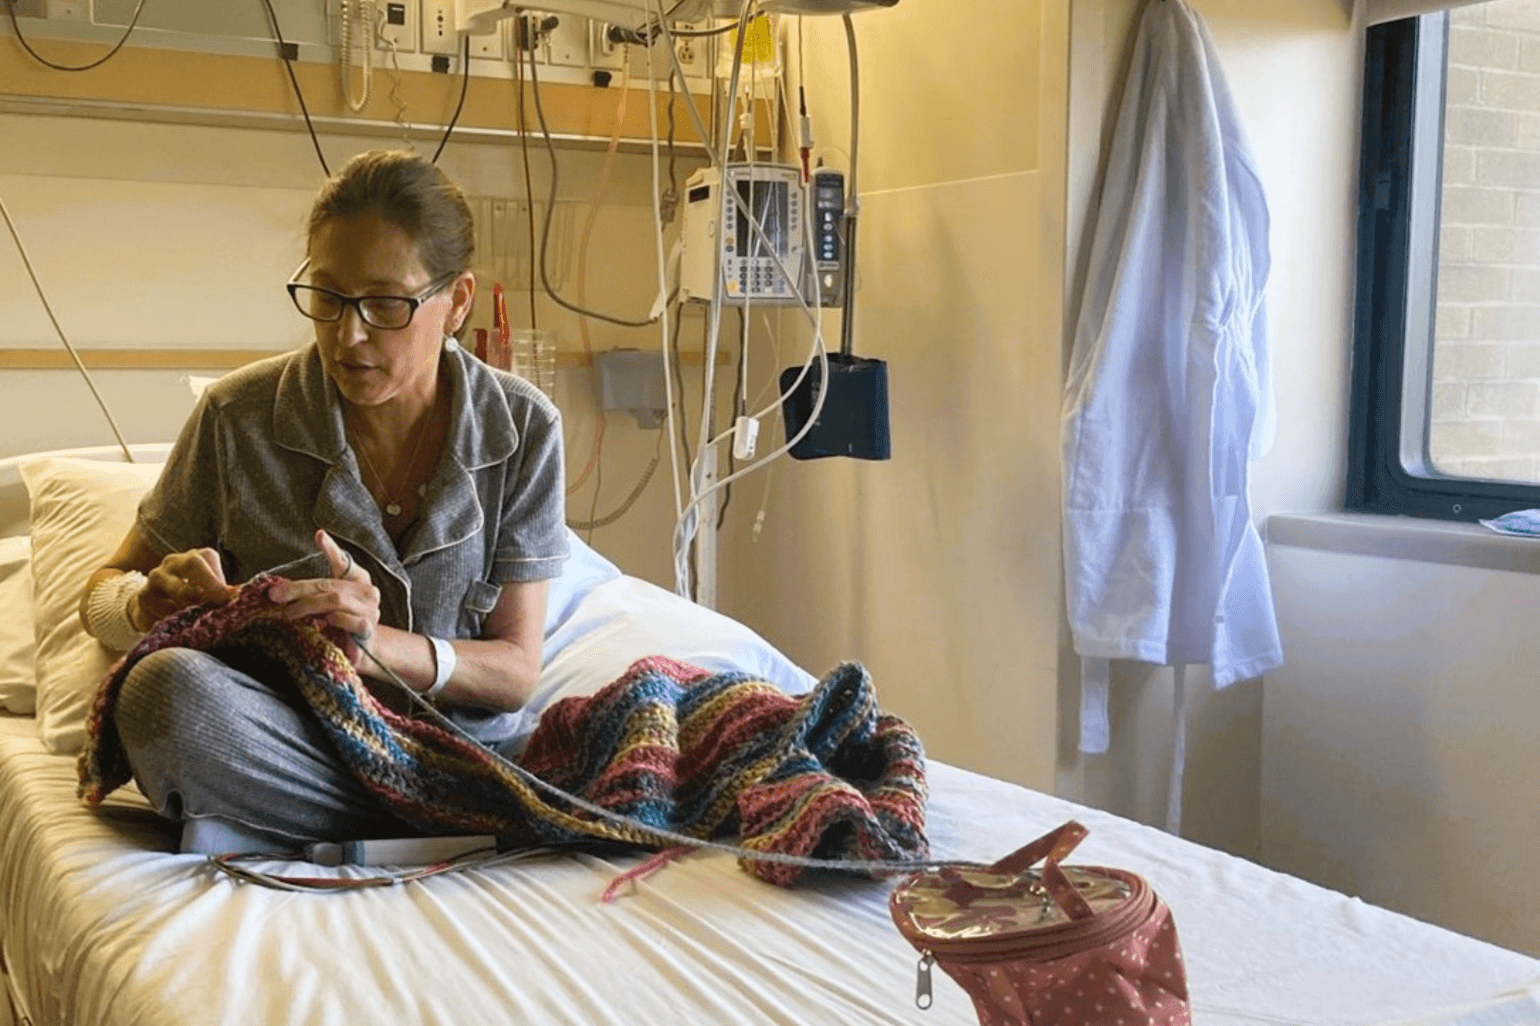 Sherry Johnson sits on her hospital bed, crocheting.